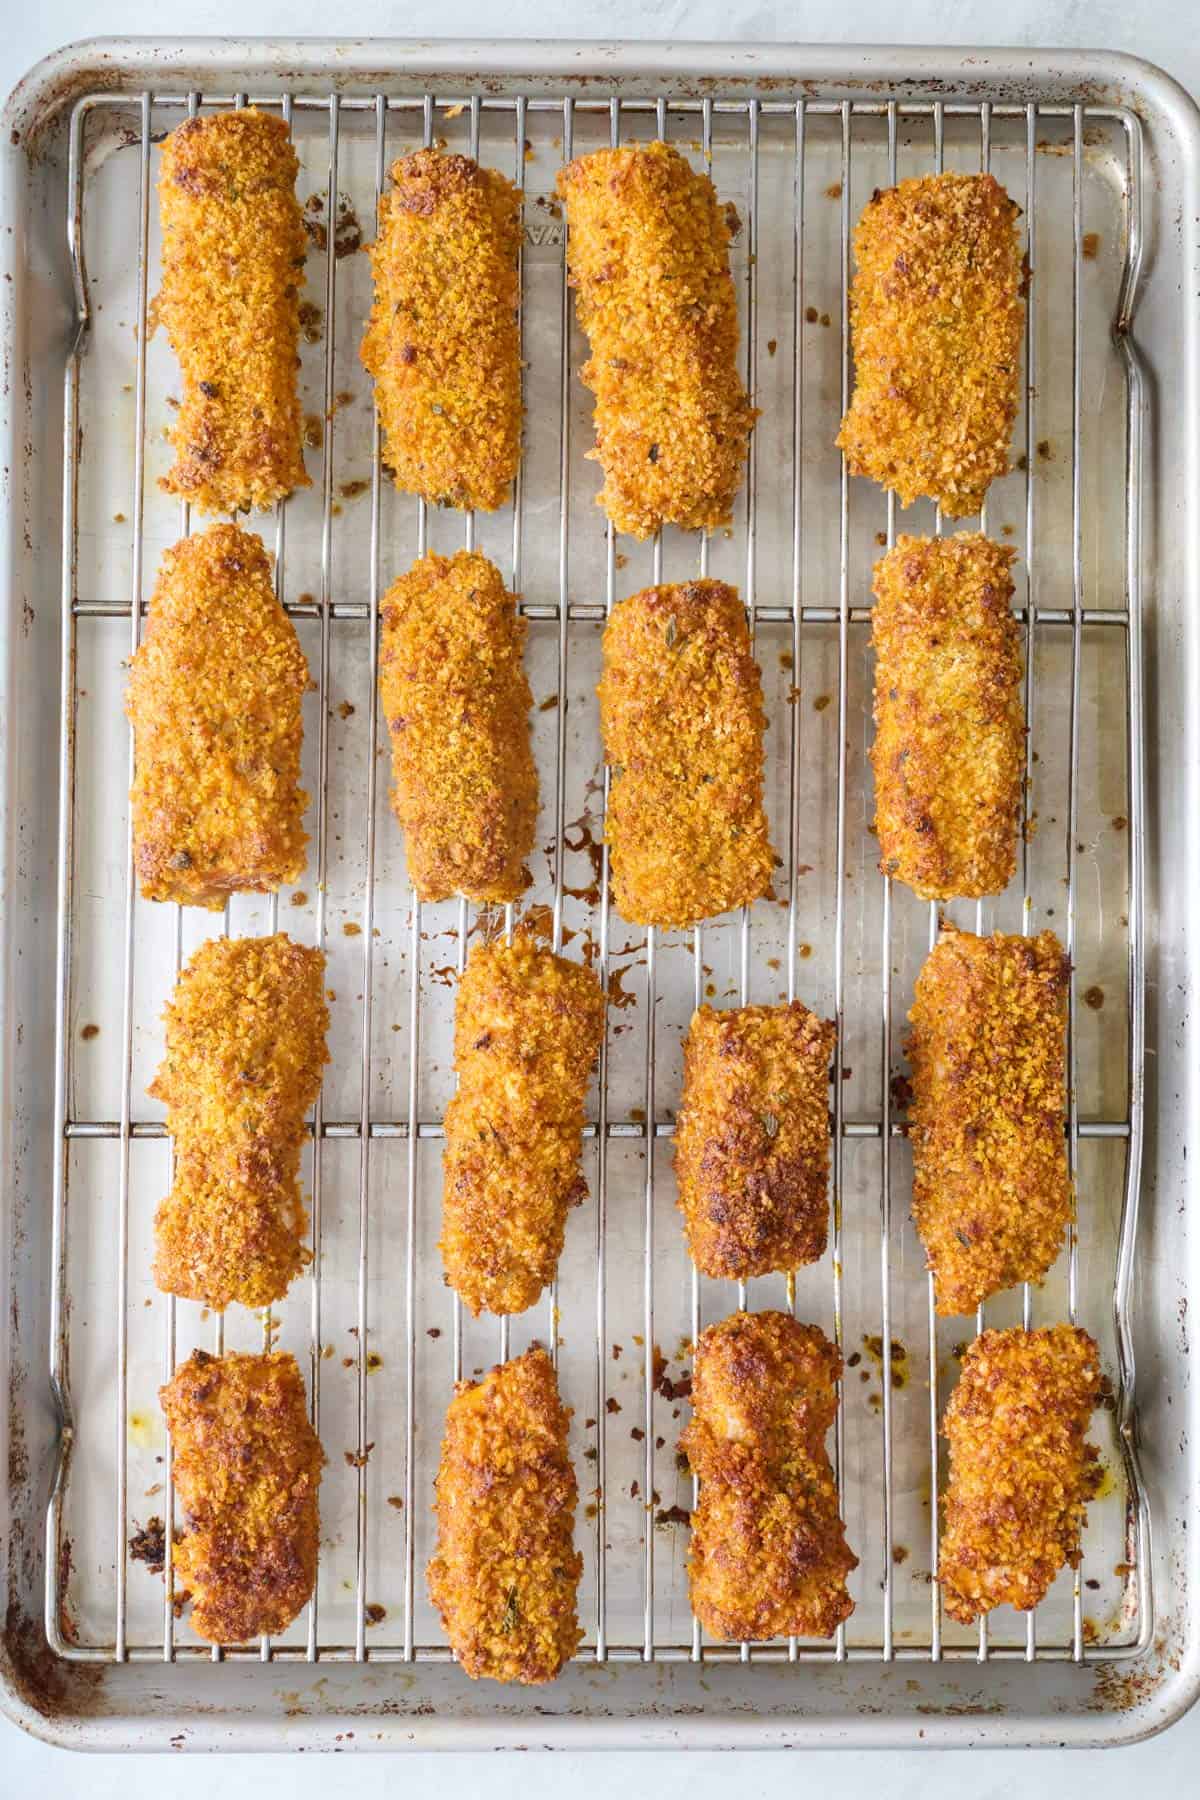 Breaded salmon pieces on a wire rack on top of a sheet pan after baking.